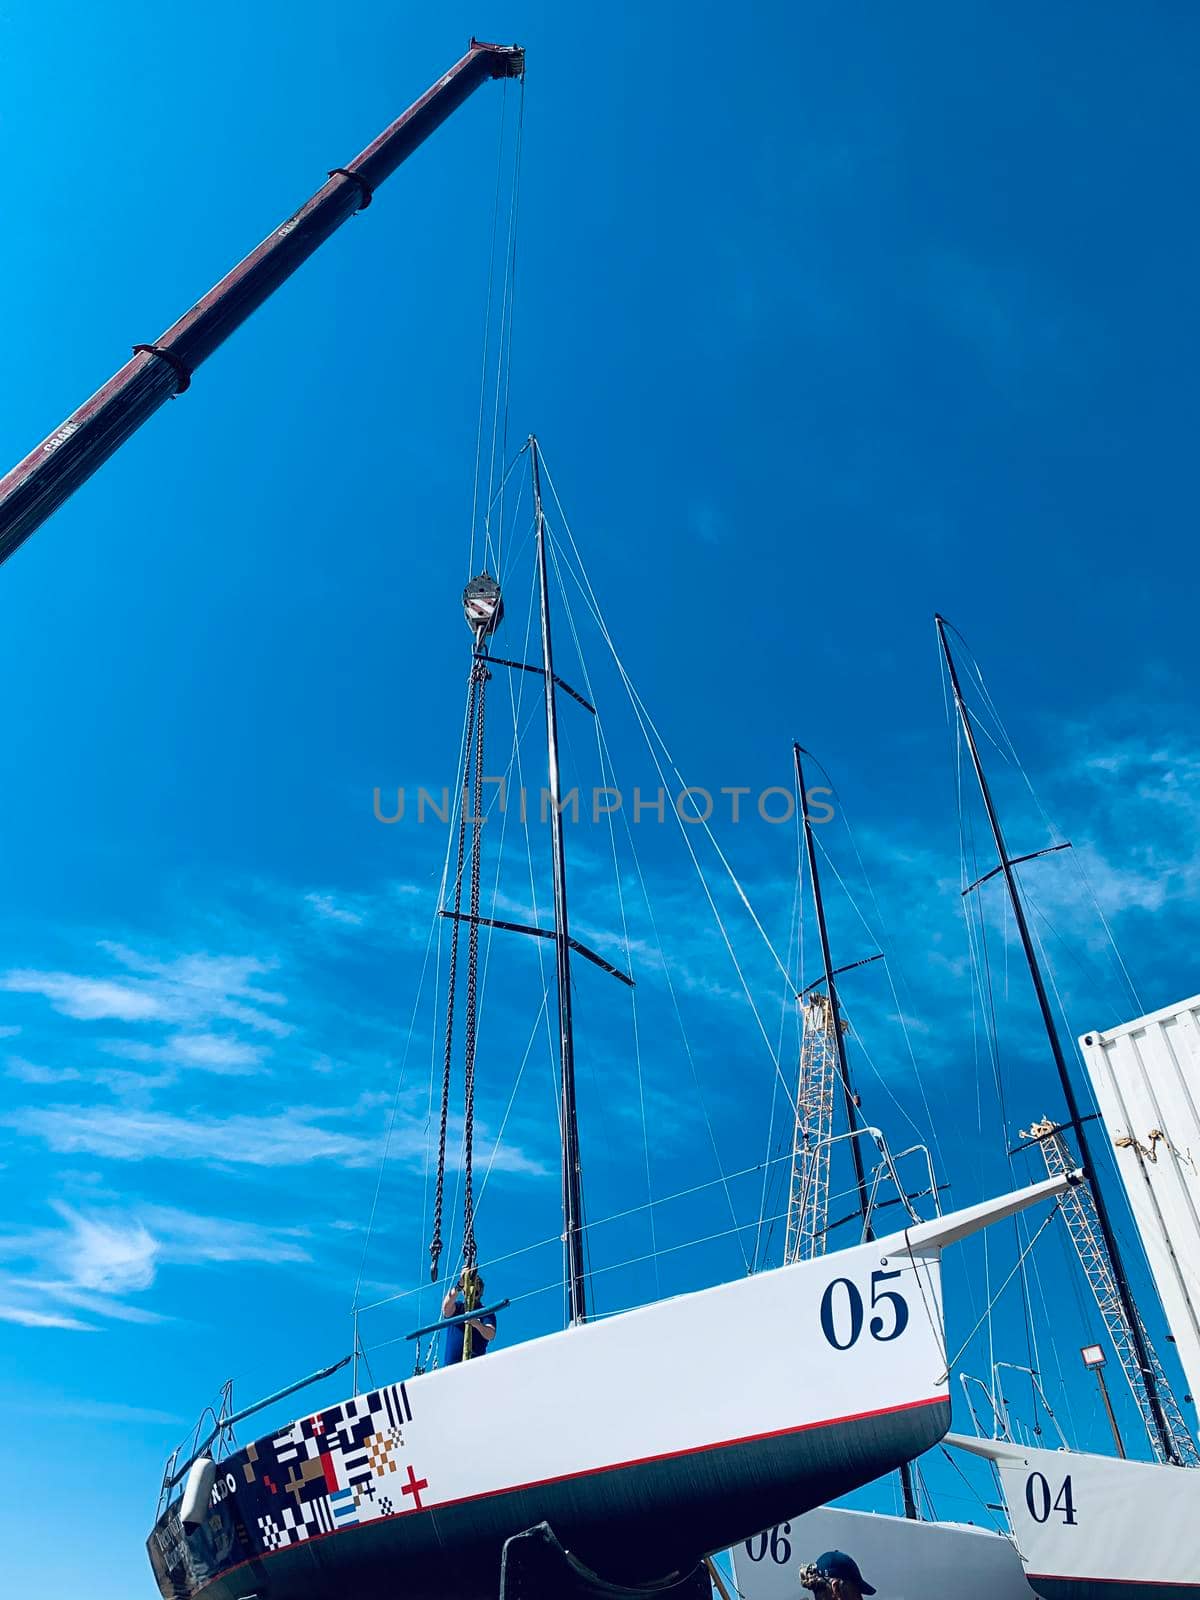 Russia, St.Petersburg, 26 May 2020: Port Hercules, the big industrial crane lifts the sailboat and floats it, the beginning of a season of sailing, a skyscraper on a background, sailboat is groundless by vladimirdrozdin